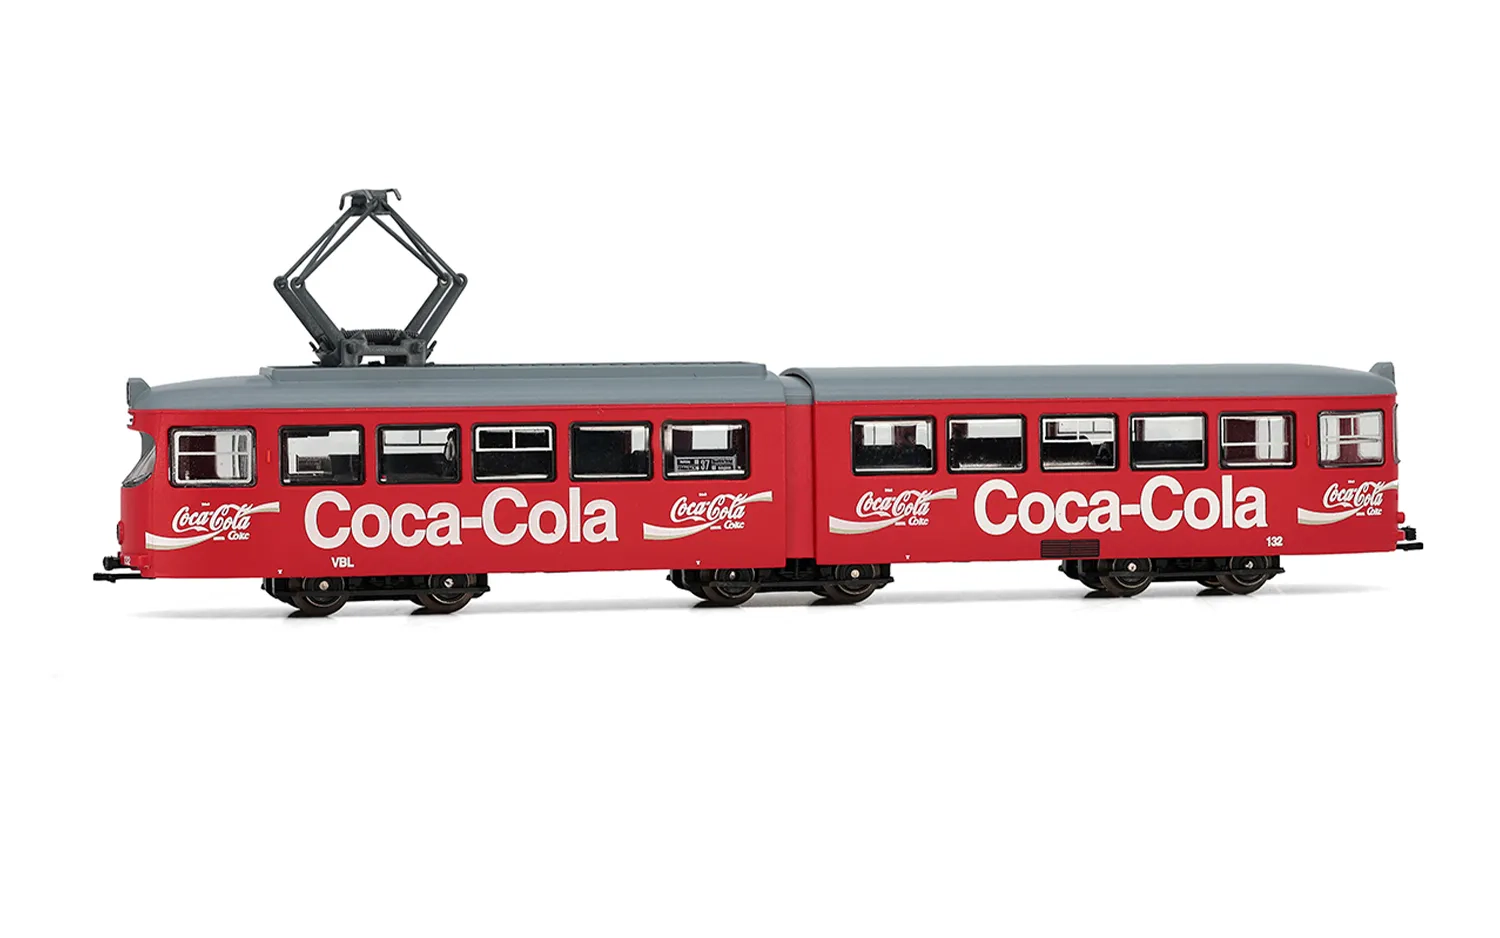 Tram Duewag GT6, one front light, "Coca-Cola", ep. IV-V, with DCC decoder